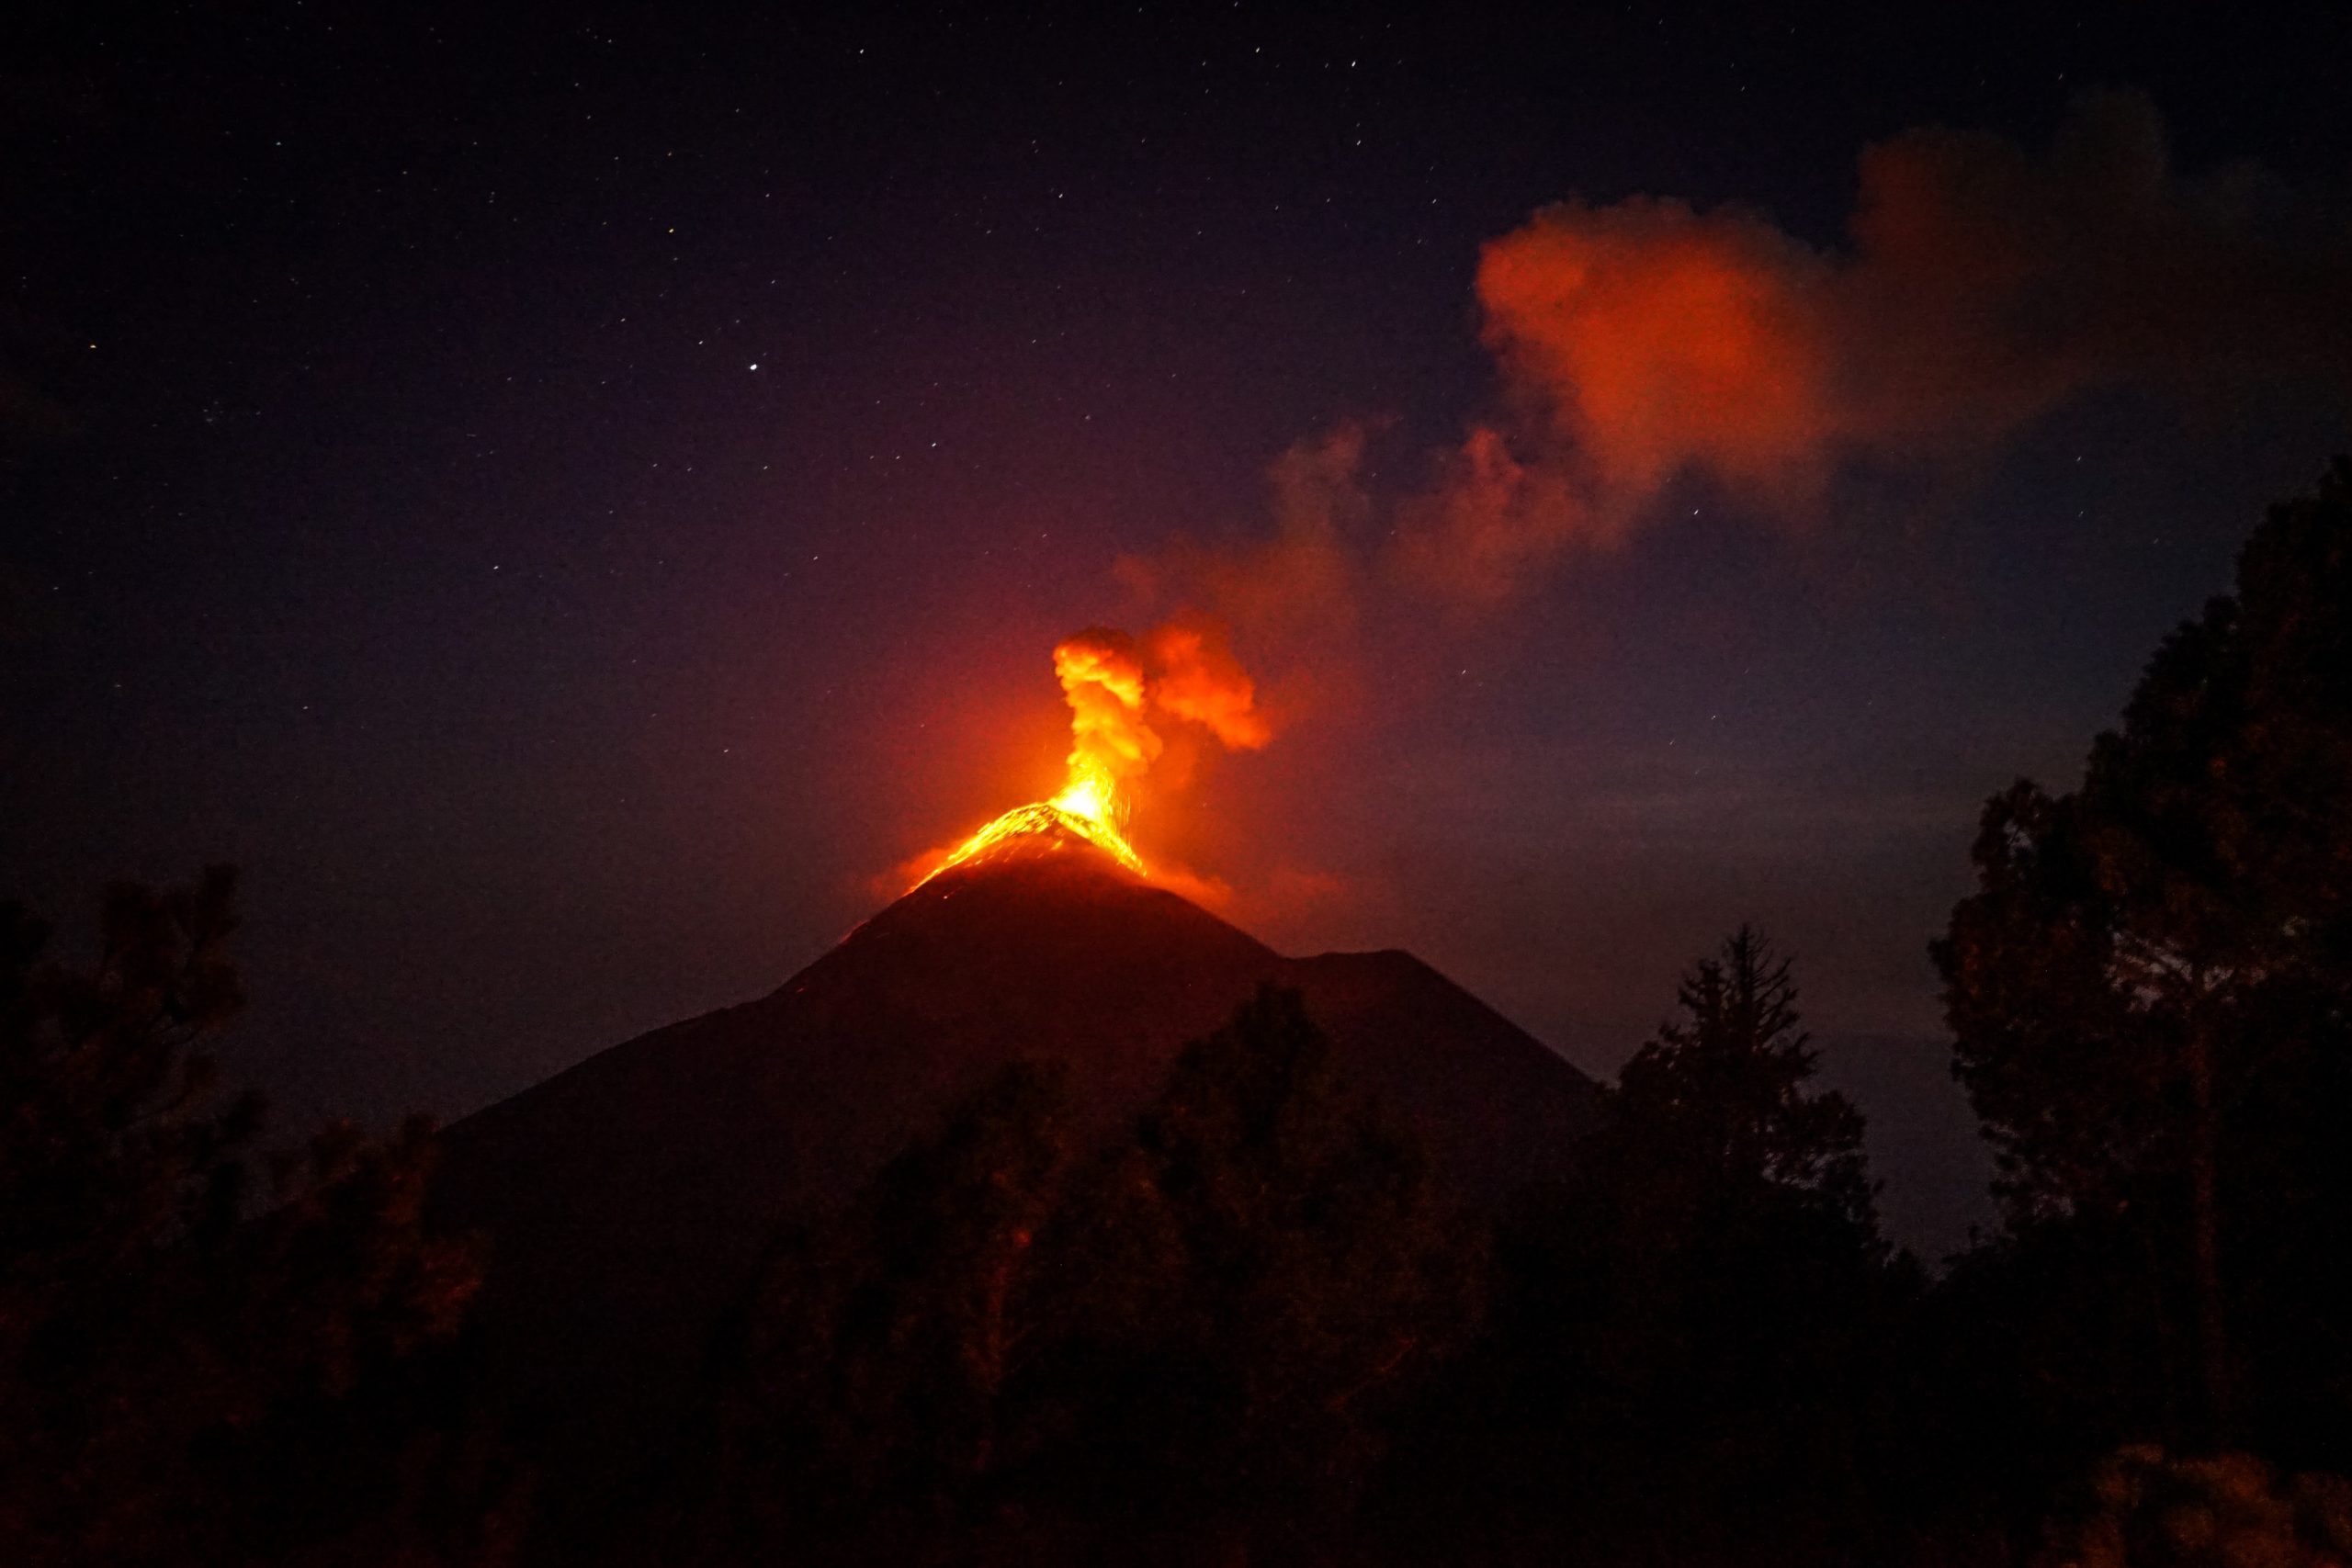 volcano featured image for BItcoin article